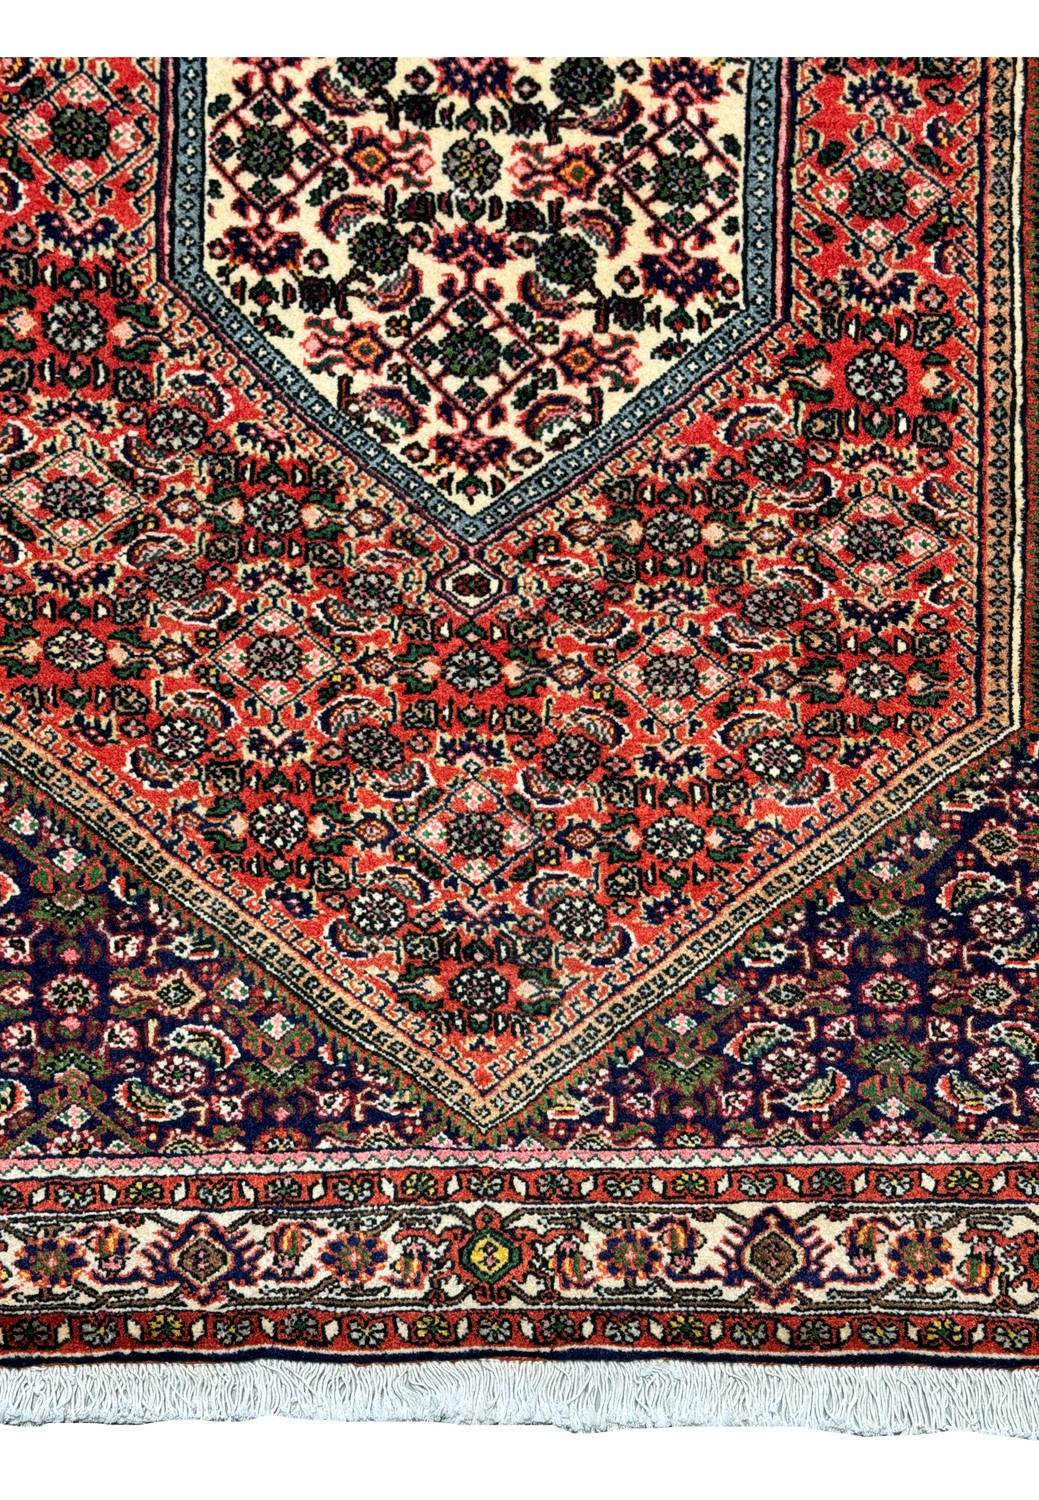 Close-up of the Persian Bijar Rug showing the complex interplay of colors and designs in the rug's central field and borders